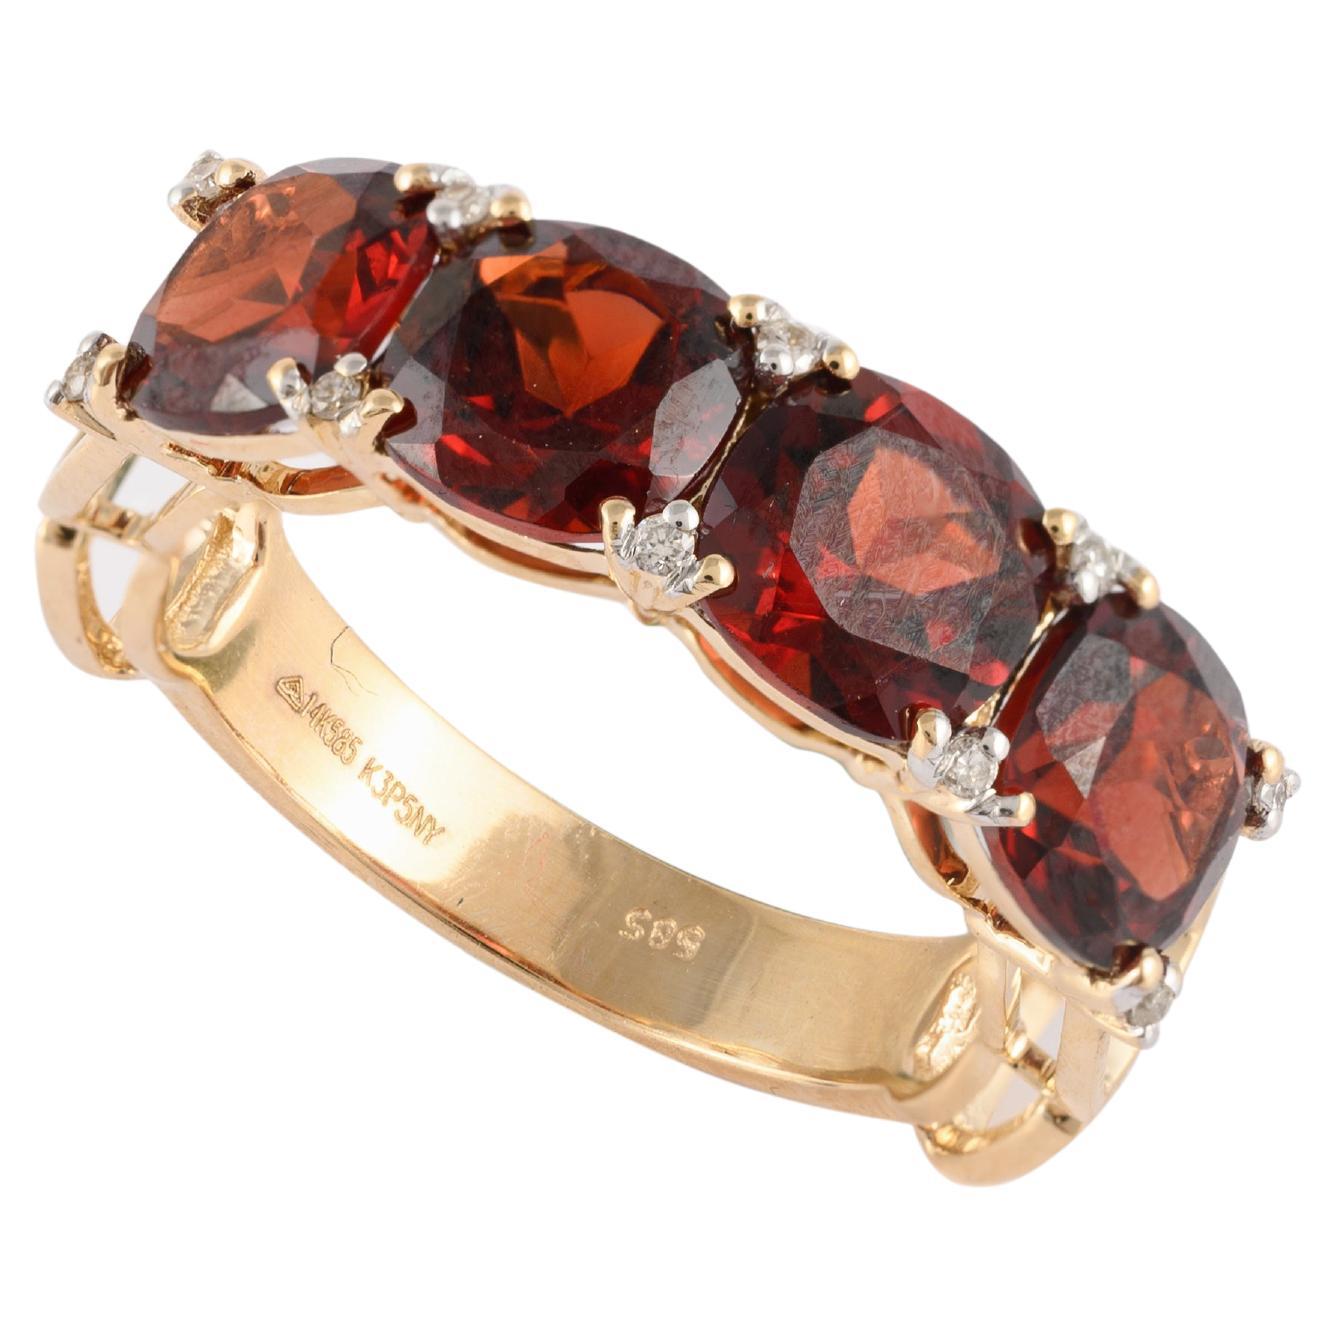 14k Solid Yellow Gold Natural 4.75 Carat Garnet Ring with Diamonds for Her